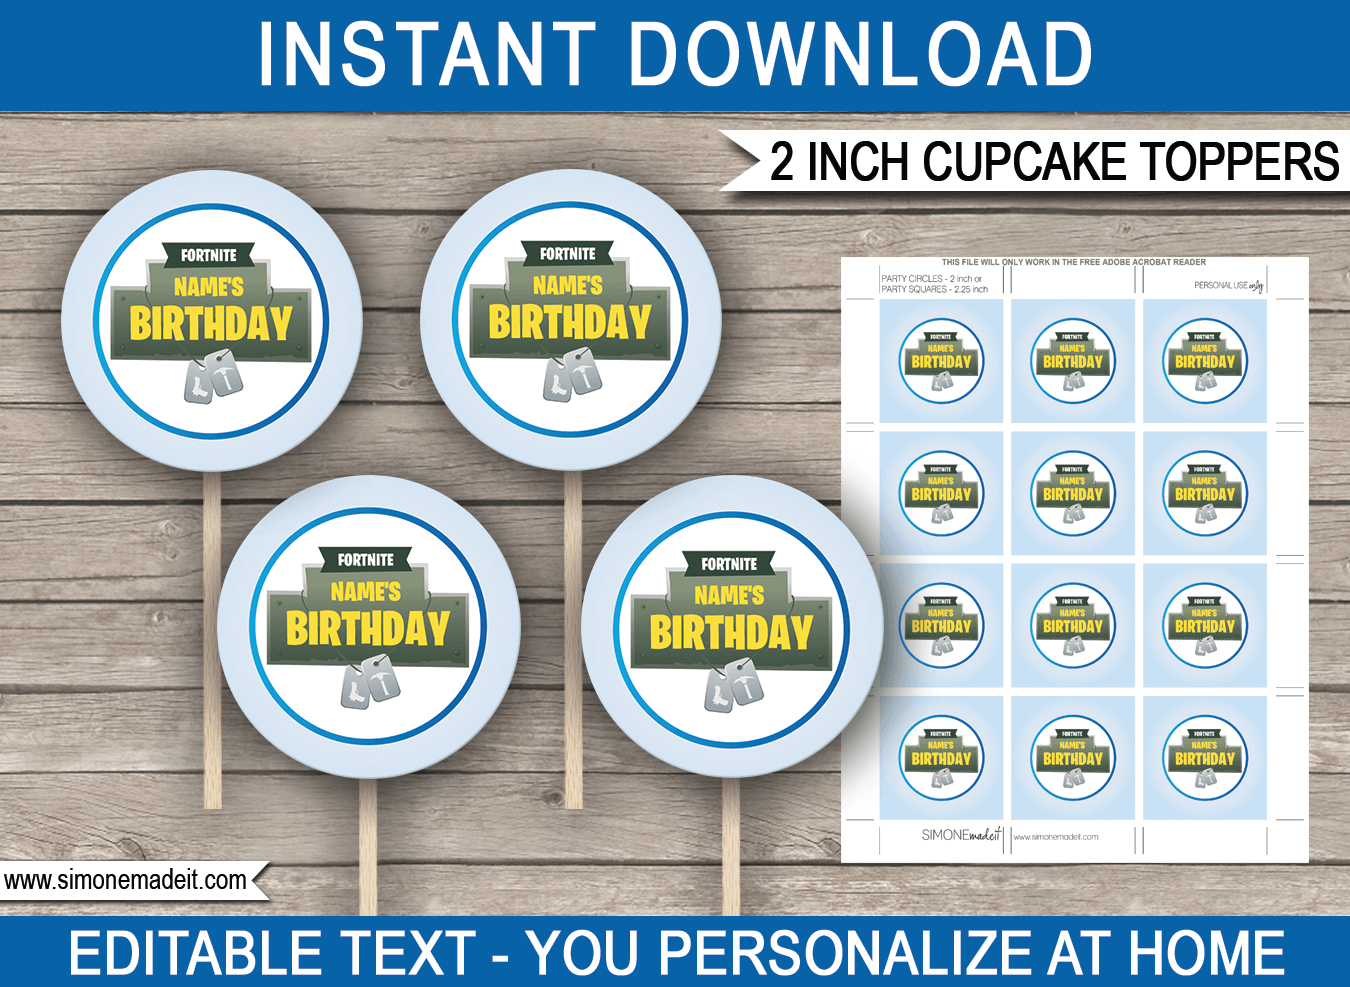 Printable Fortnite Cupcake Toppers Template | Fortnite Theme Party - Free Printable Fortnite Cupcake Toppers